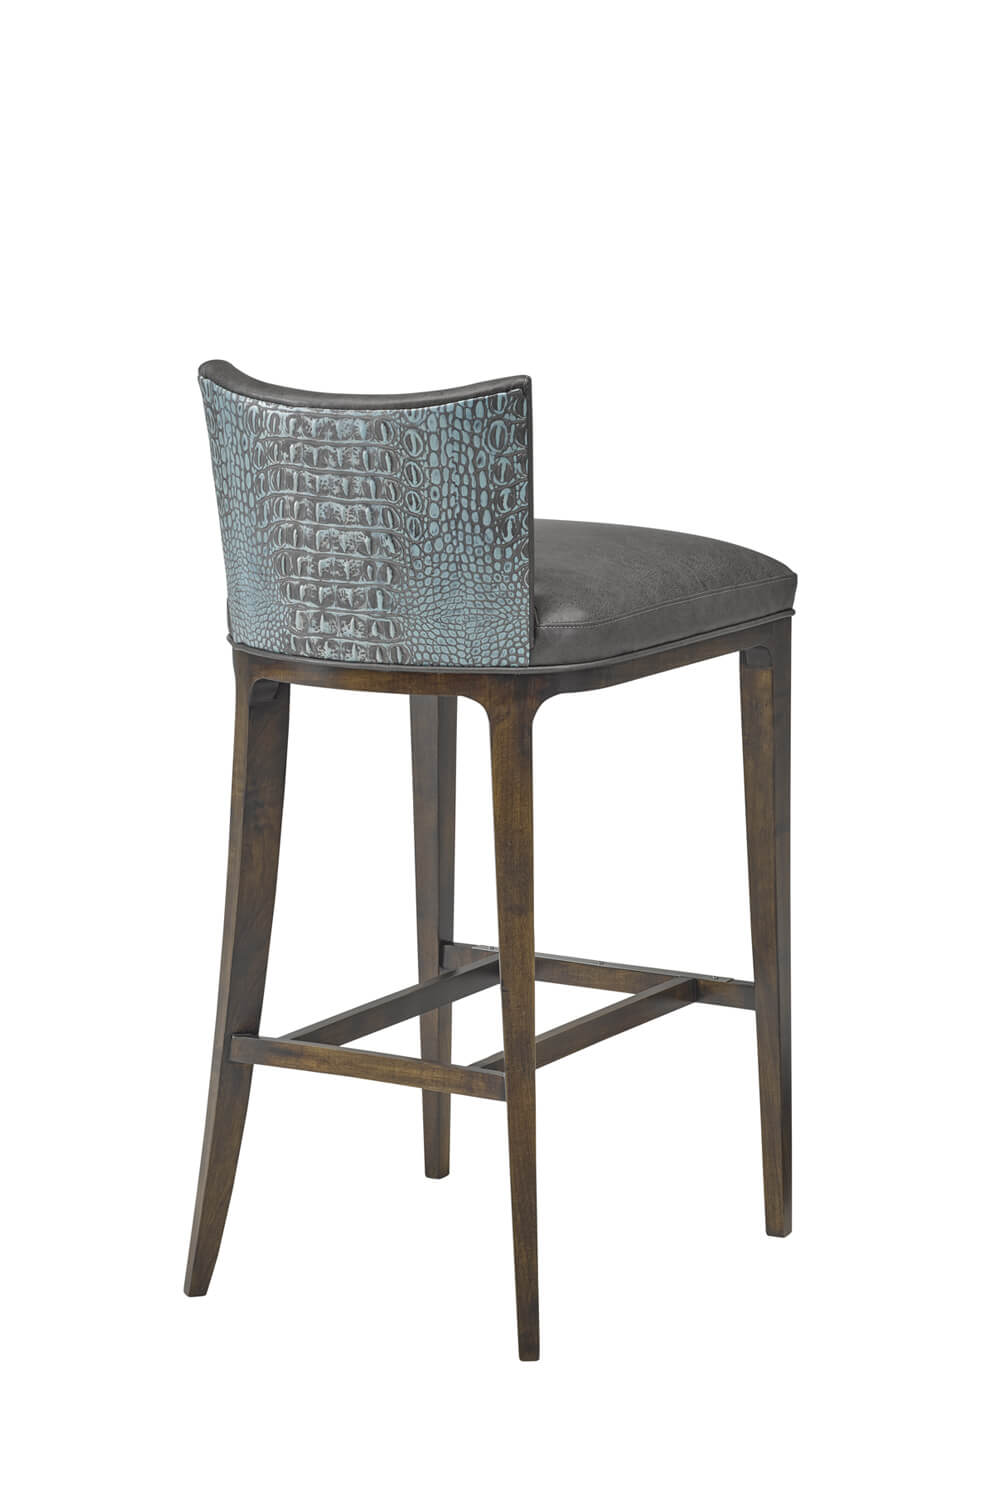 Leathercraft's Charlie 4828-10 Non-Swivel Wood Bar Stool with Low Back - View of Back